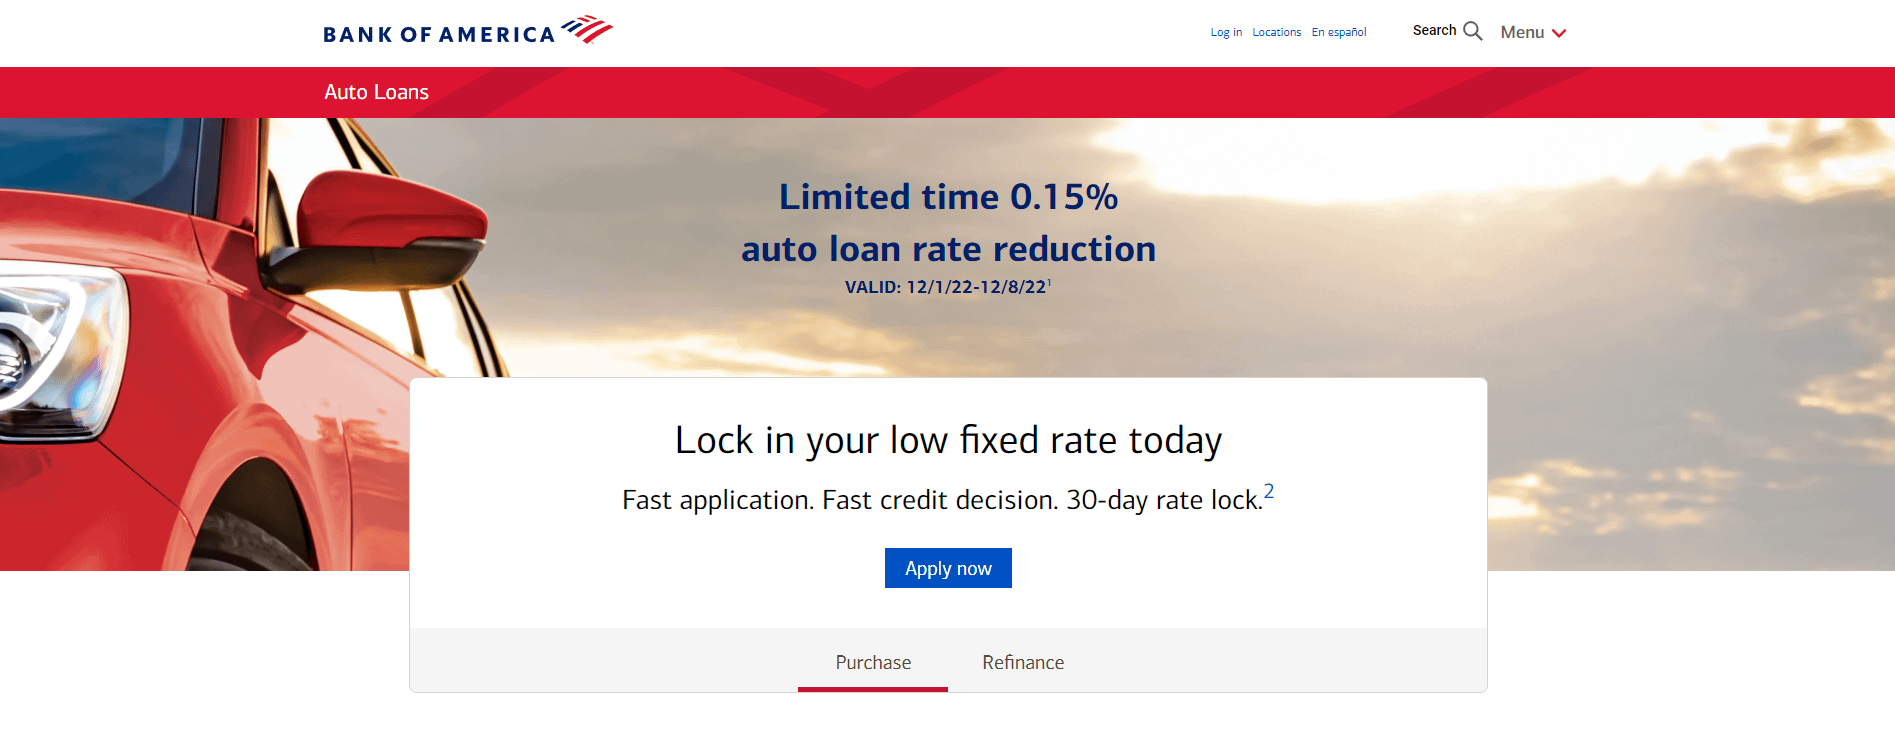 Bank of America auto loan page